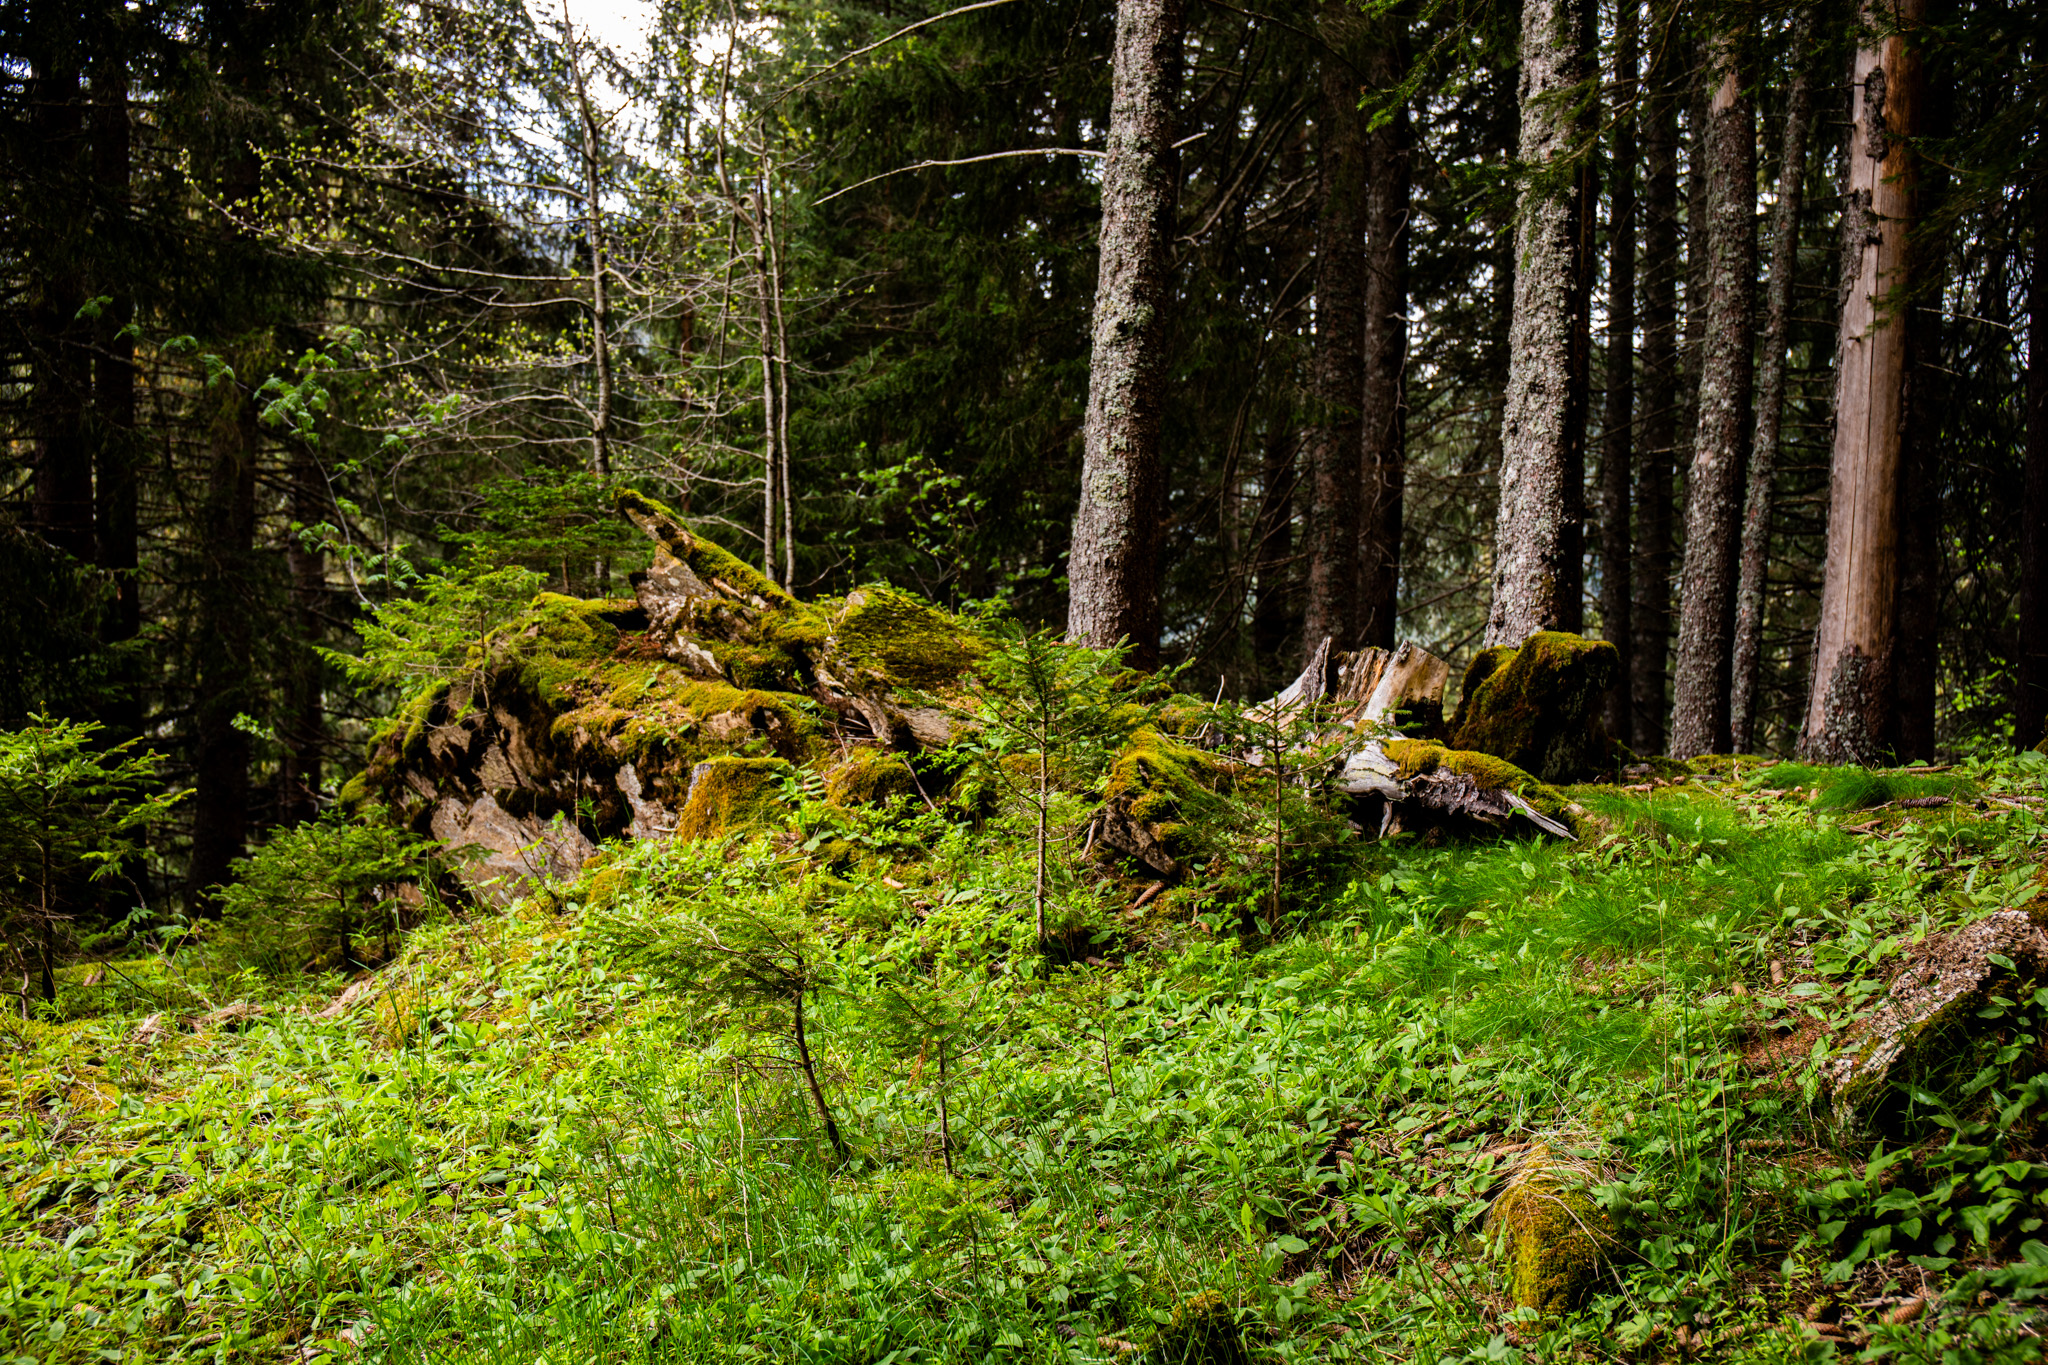 General 2048x1365 photography outdoors nature greenery plants trees forest moss grass leaves rocks boulder green